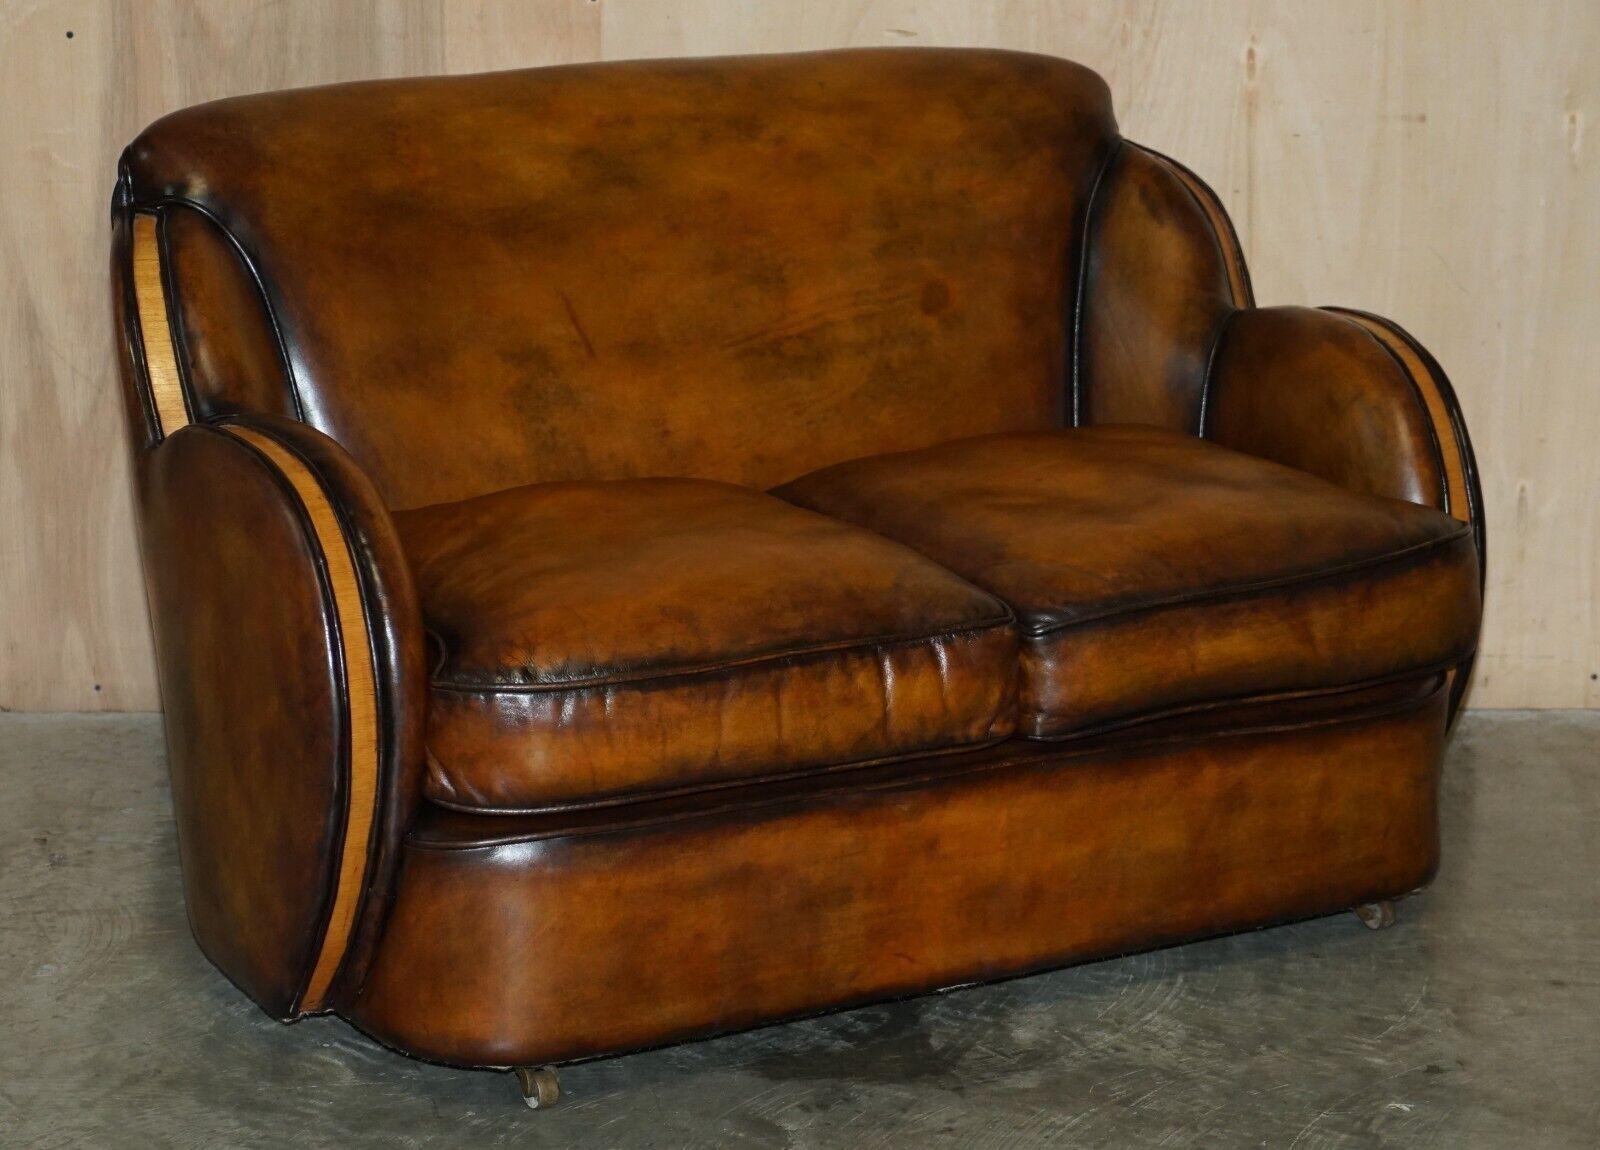 Royal House Antiques

Royal House Antiques is delighted to offer for sale this 1 of 2 of very rare Harry & Lou Epstein Art Deco two seat Cloud sofas with Birch frames and one of a kind, hand dyed brown leather upholstery.

Please note the delivery